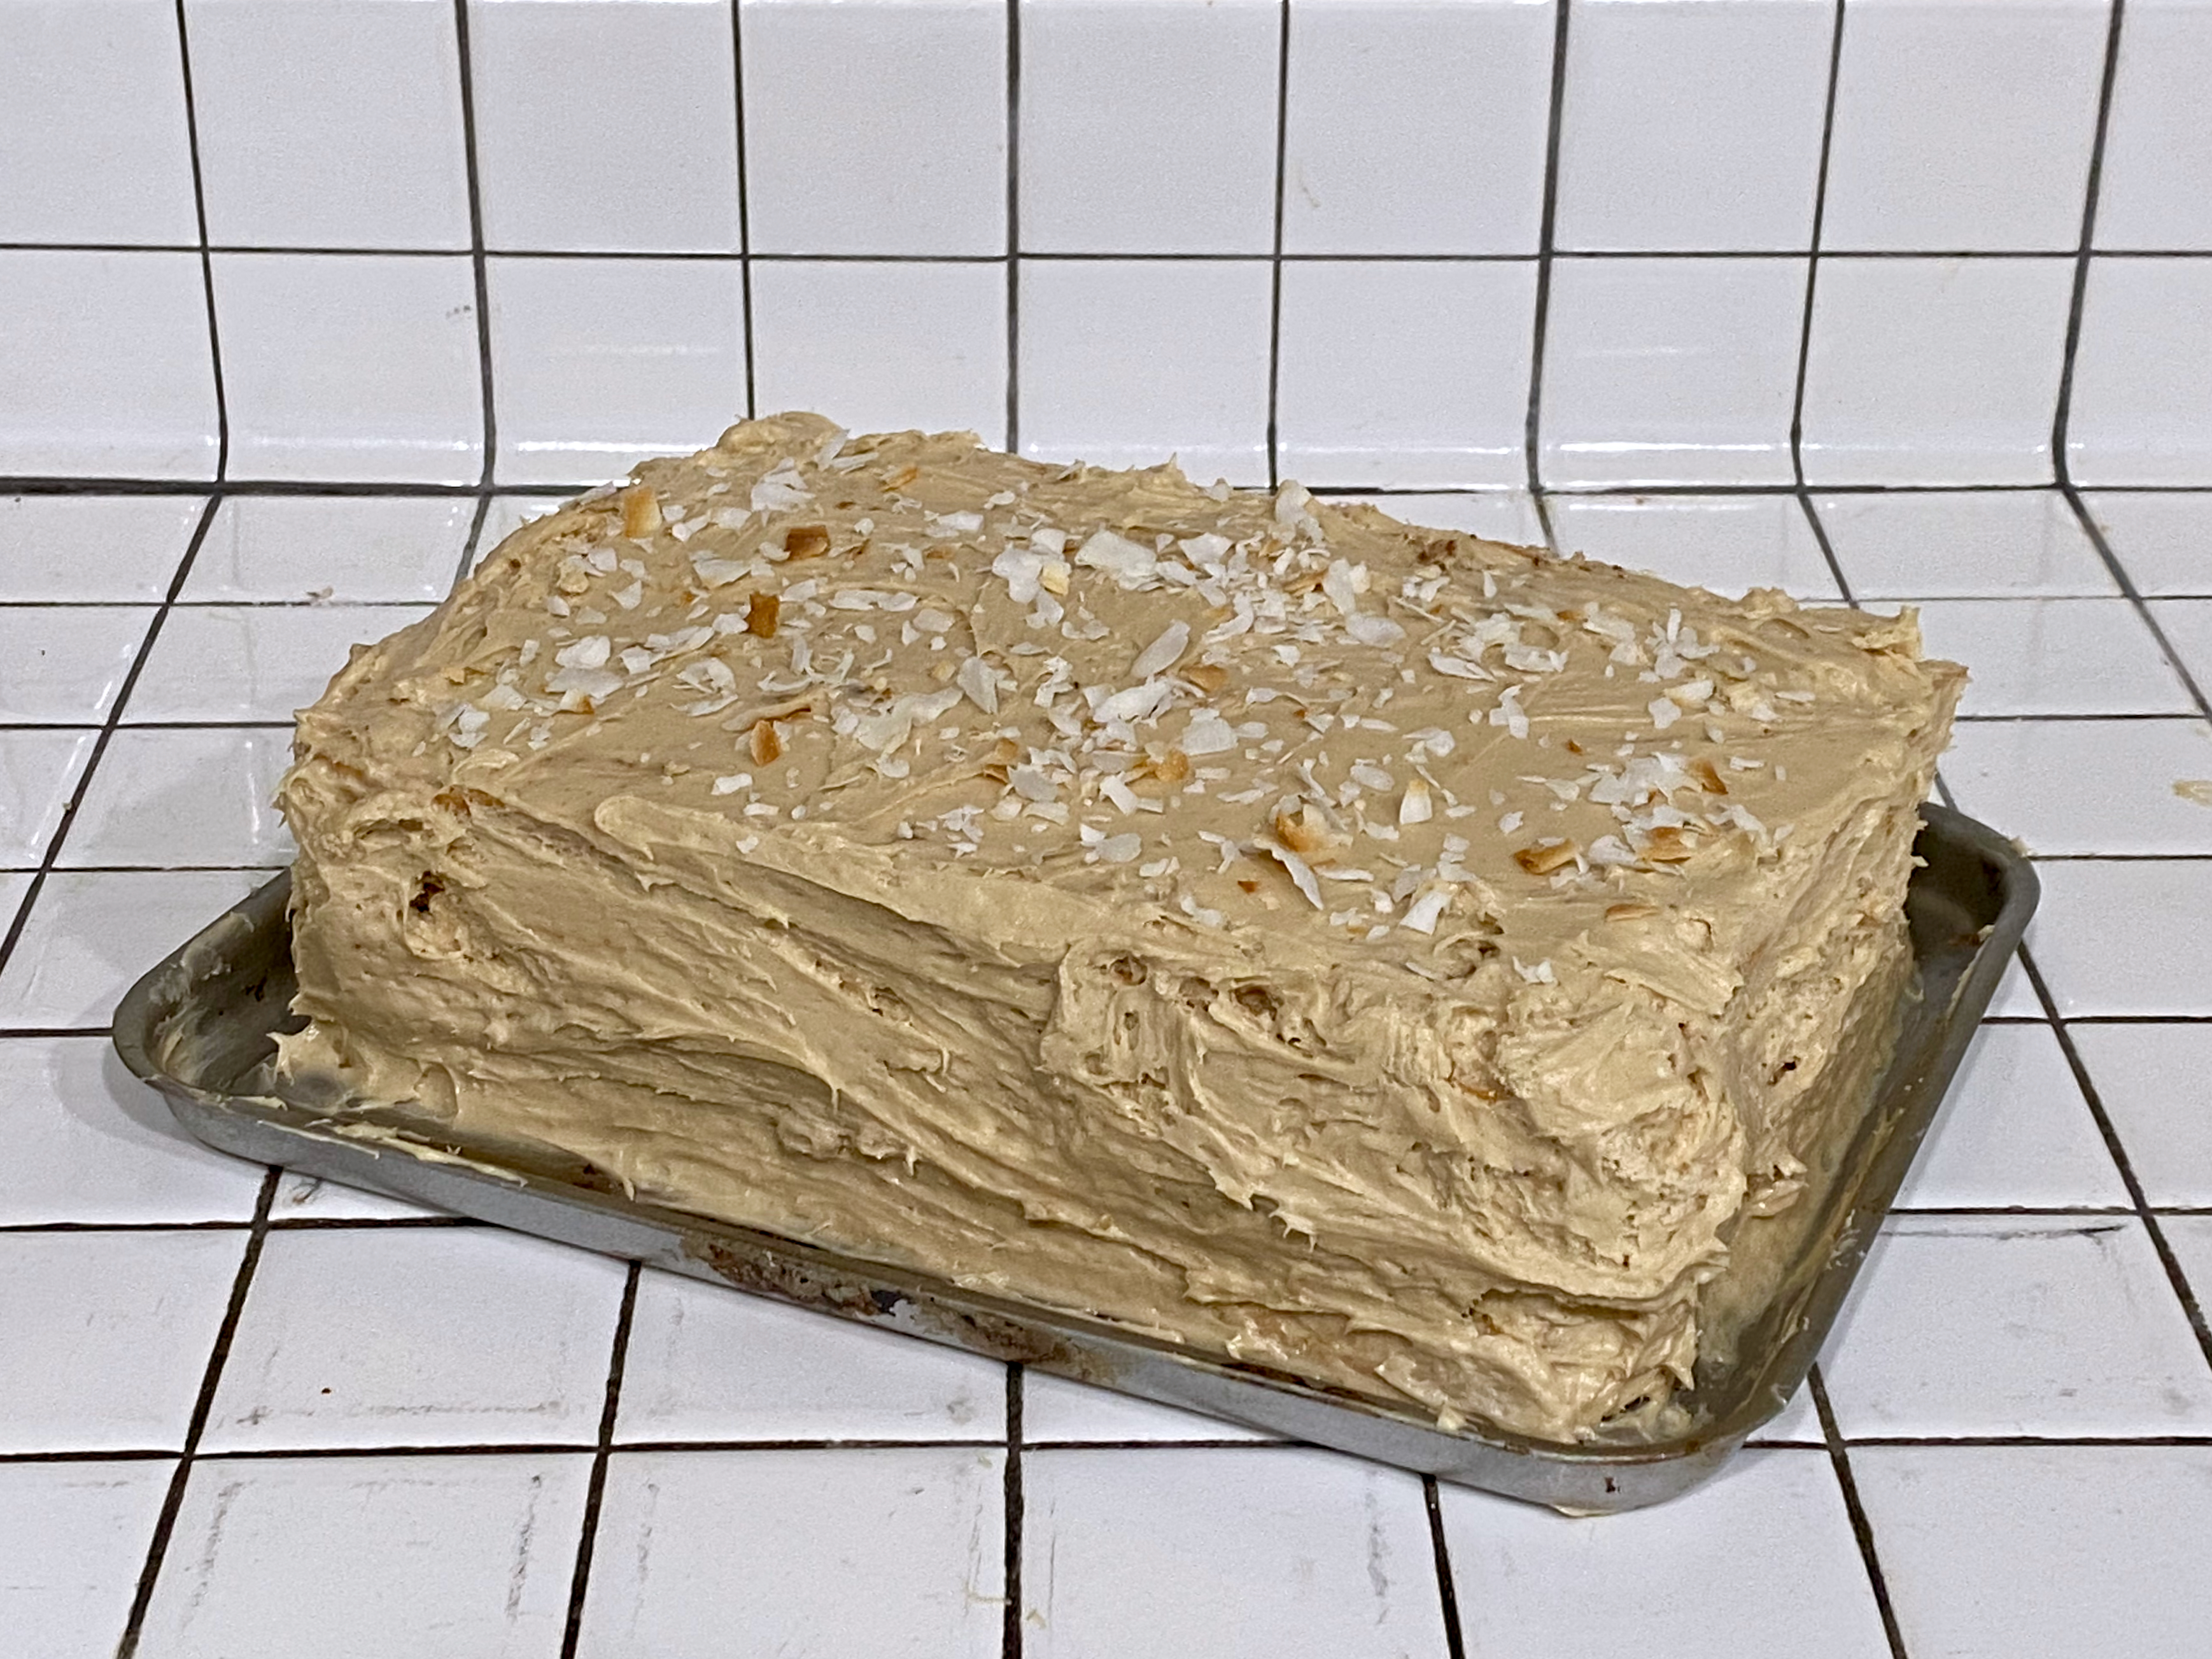 A frosted, coffee-colored two layer cake topped with toasted coconut flakes.